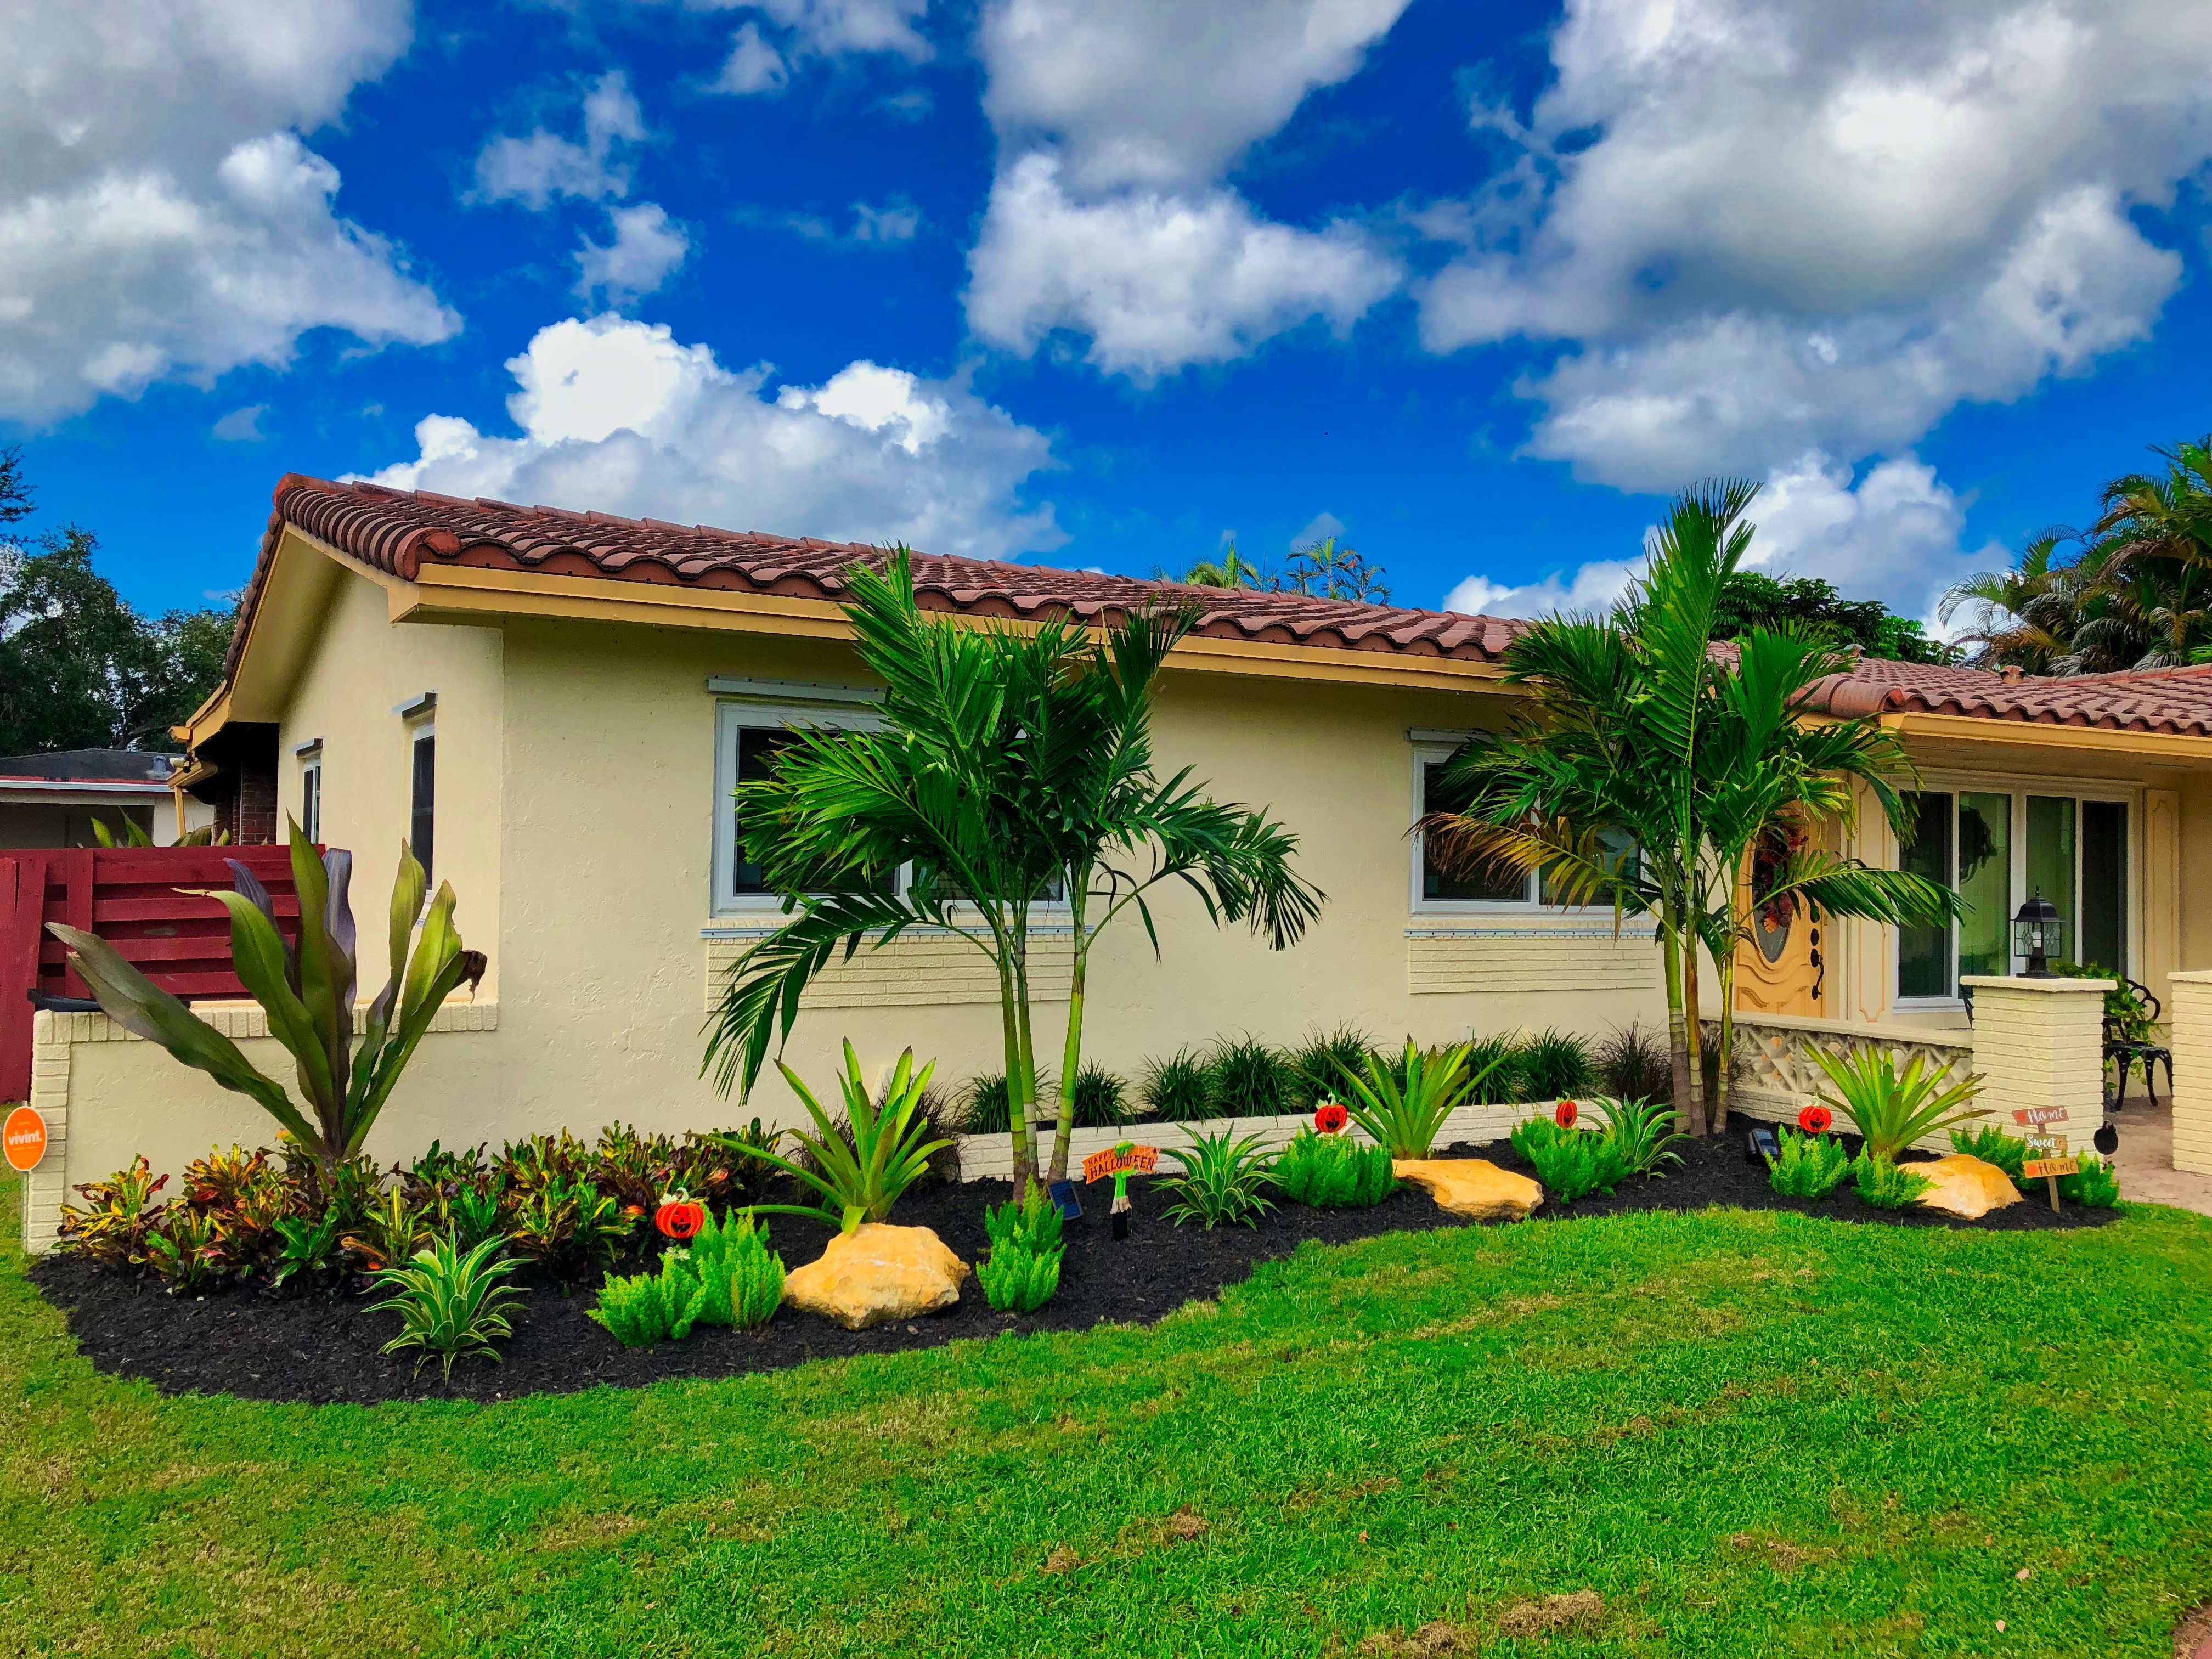 Pink And Green Lawn Care Landscape, South Florida Landscaping Ideas For Front Yard